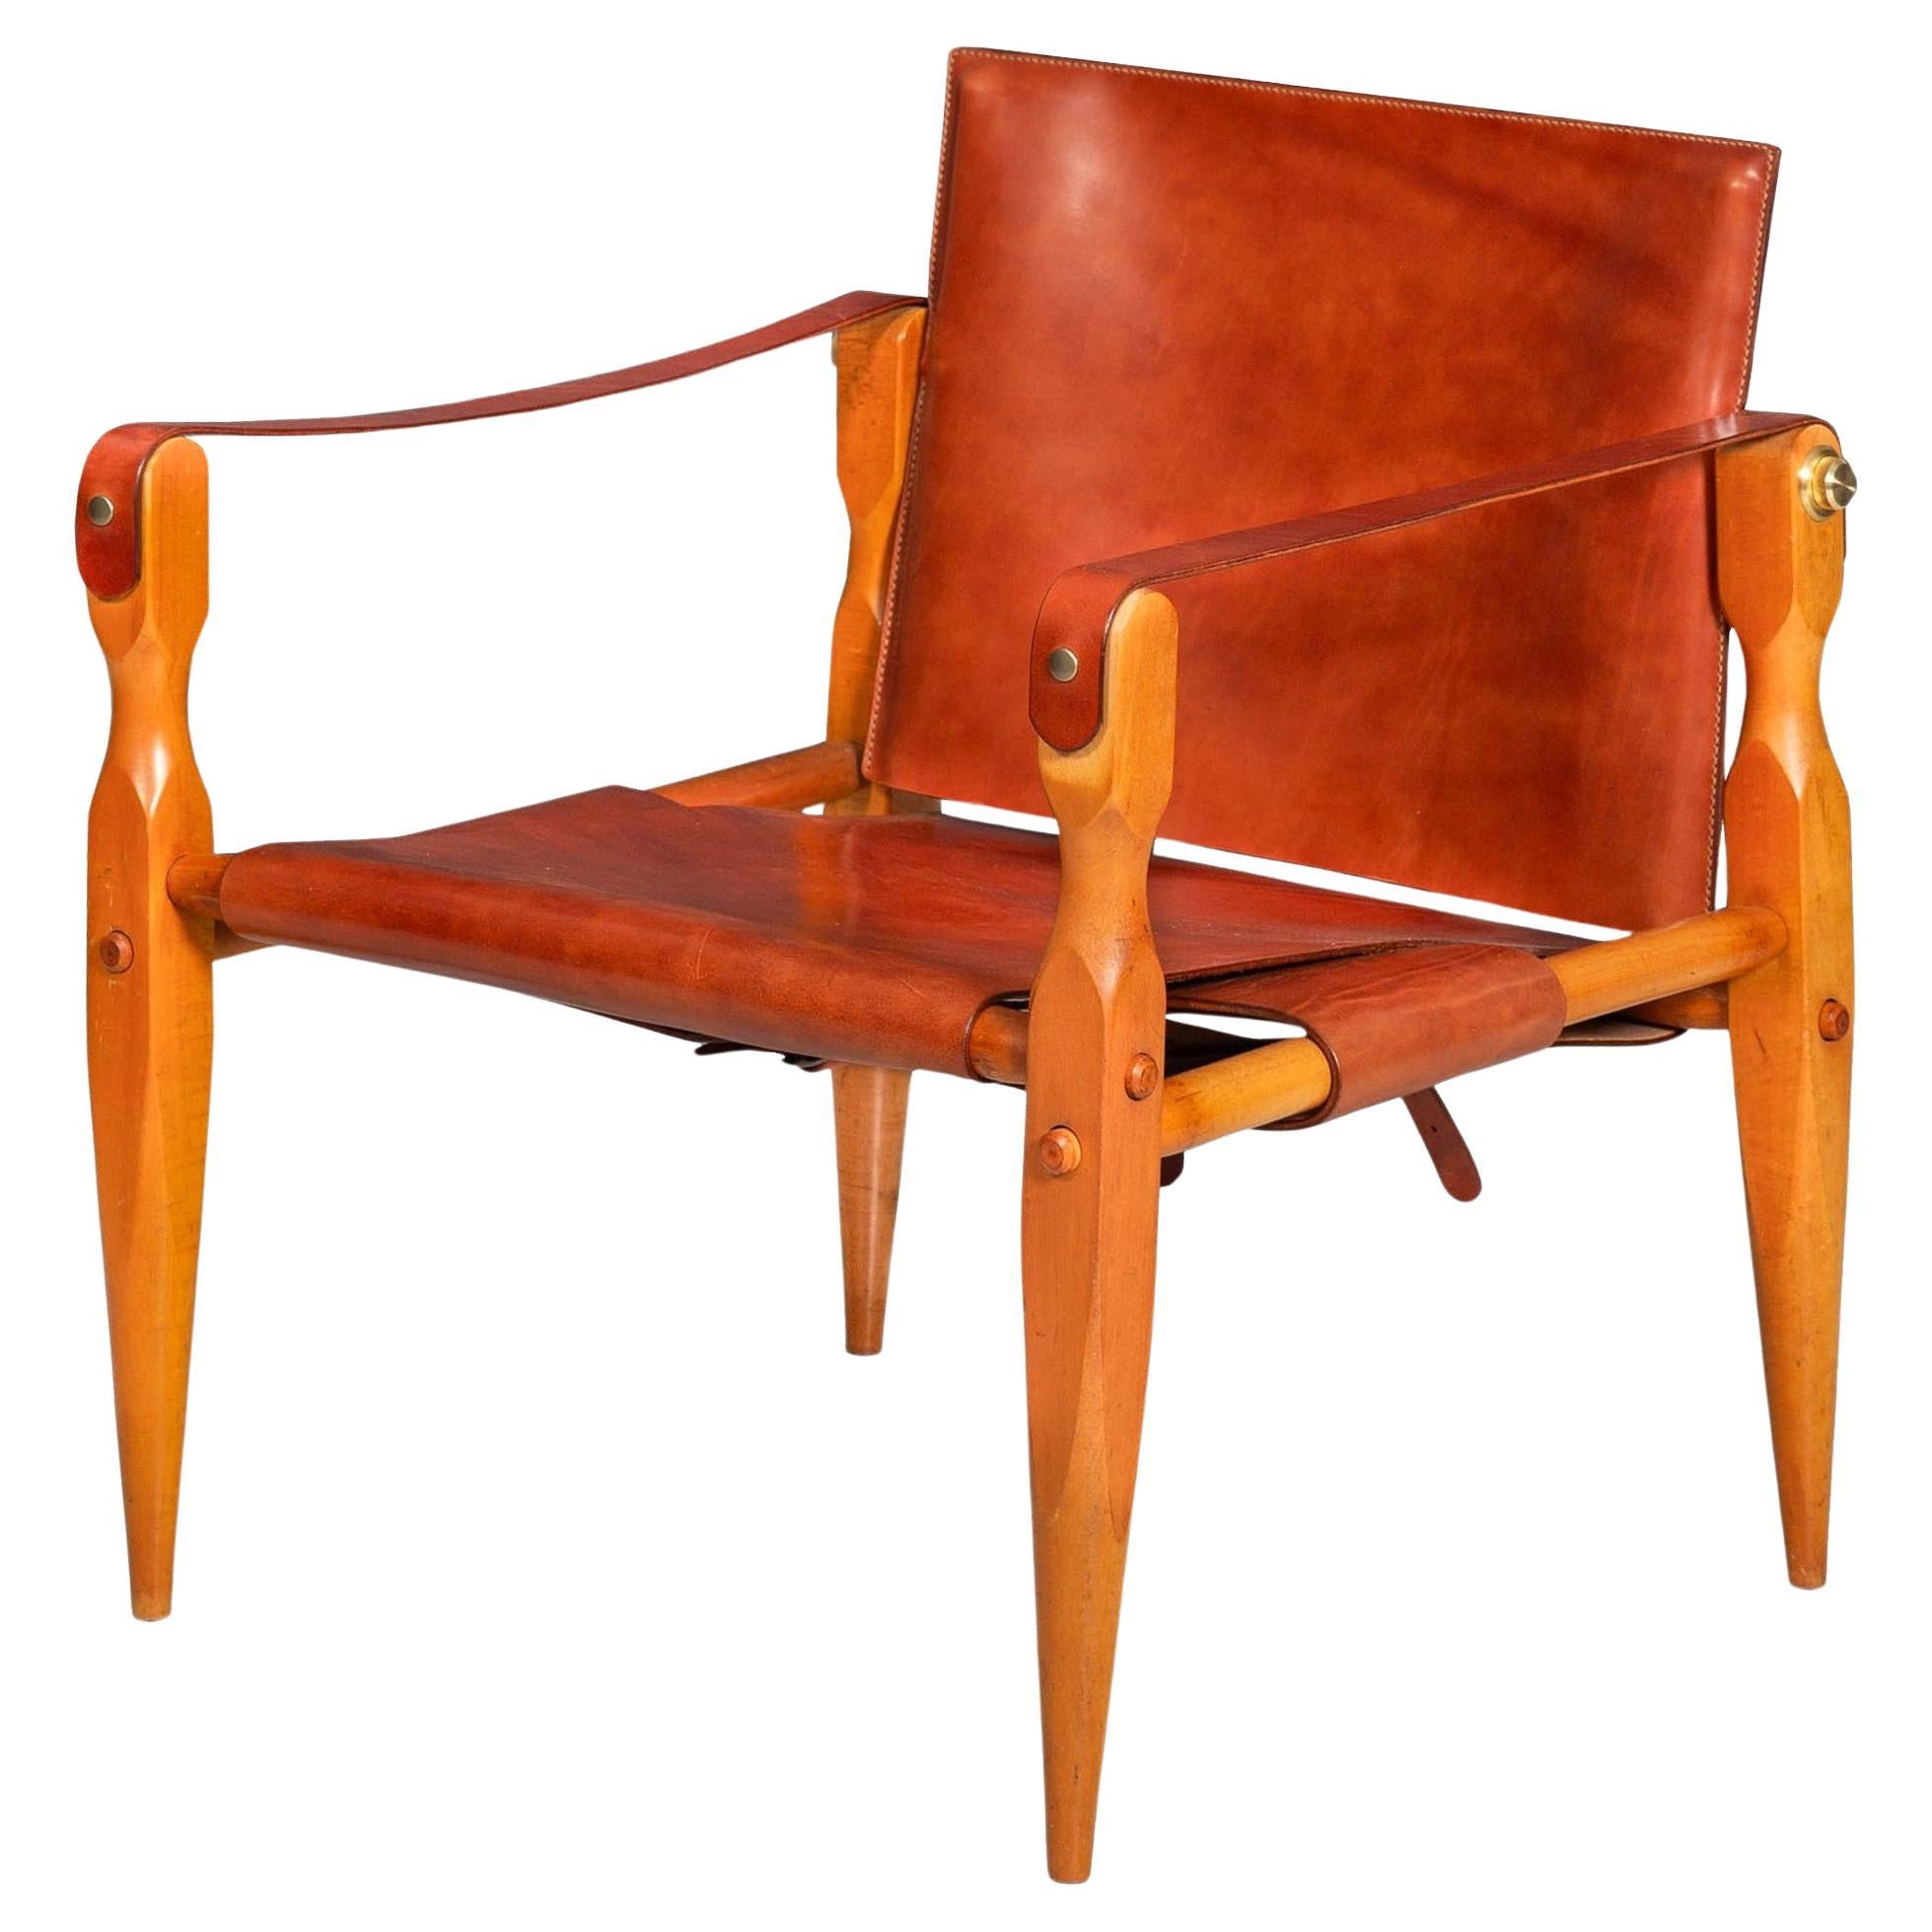 Gorgeous Circa 1970s Mid-Century Modern “Safari” Chair in New Leather For Sale